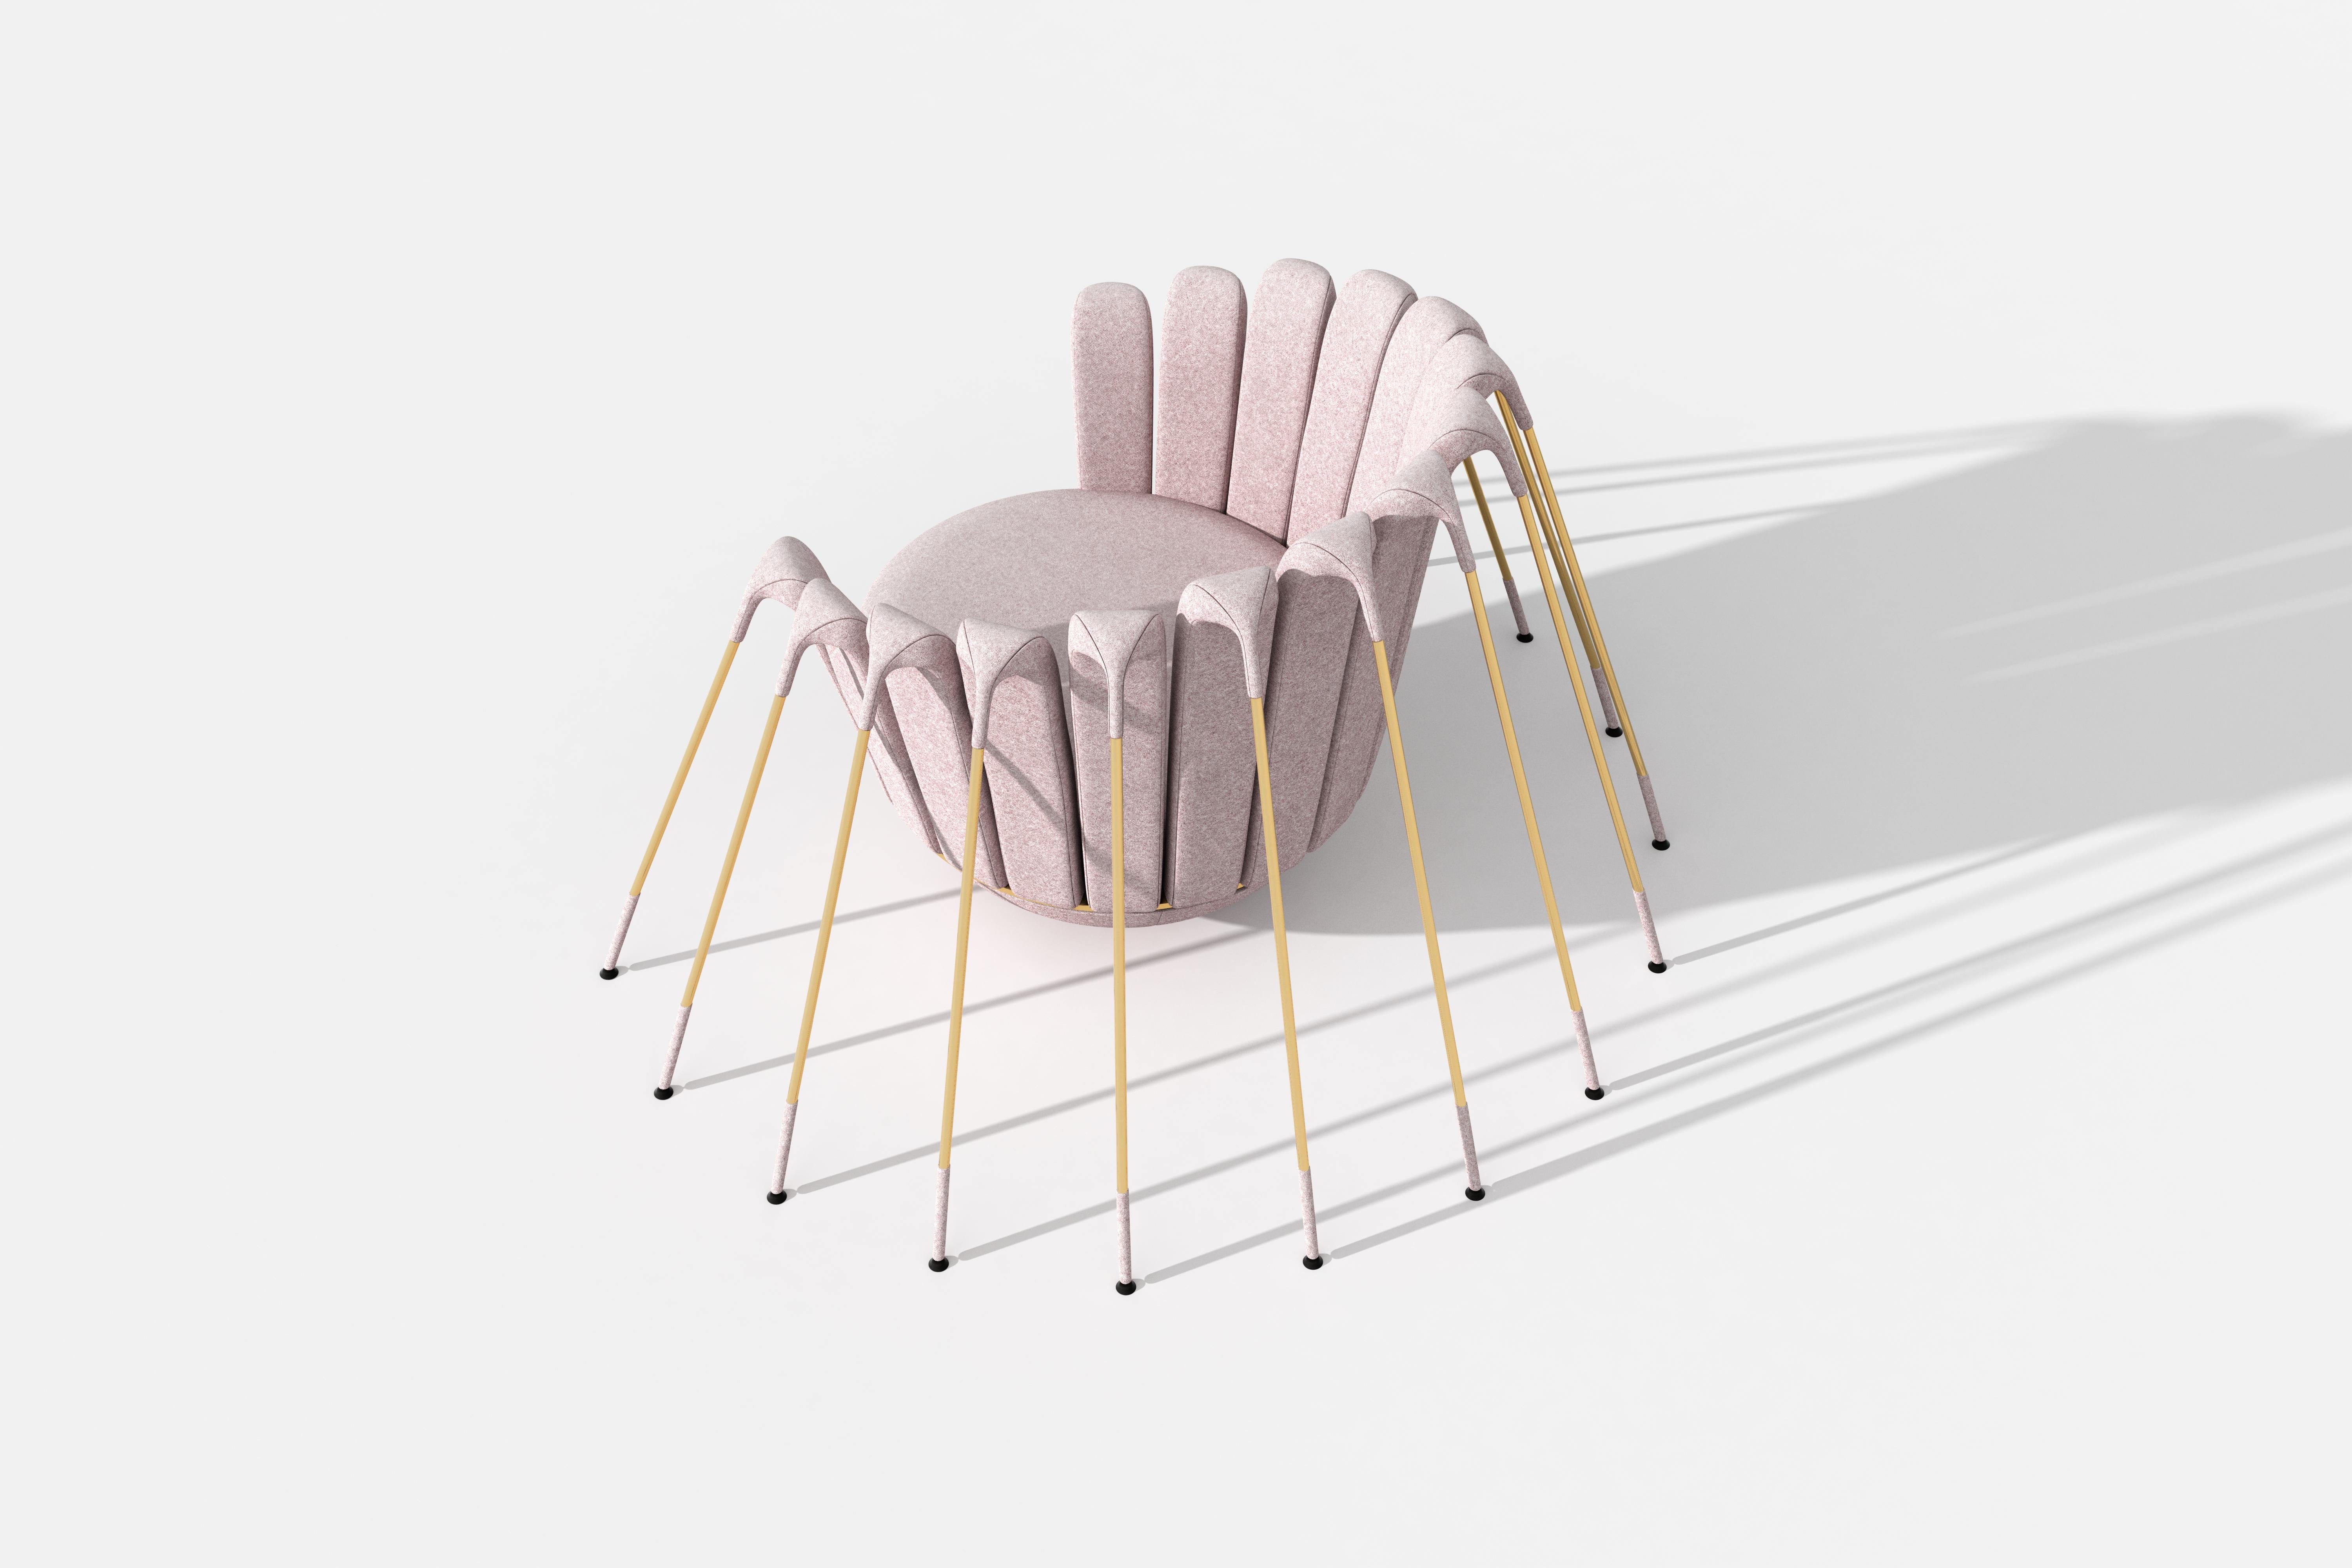 Les Araigneés armchair is upholstered with powder pink velvet and placed on a hemispherical base, which is suspended by a multitude of gold metal legs.

In the vivid imagination of Parisian-Italian designer Marc Ange, “Les Araigneés drew